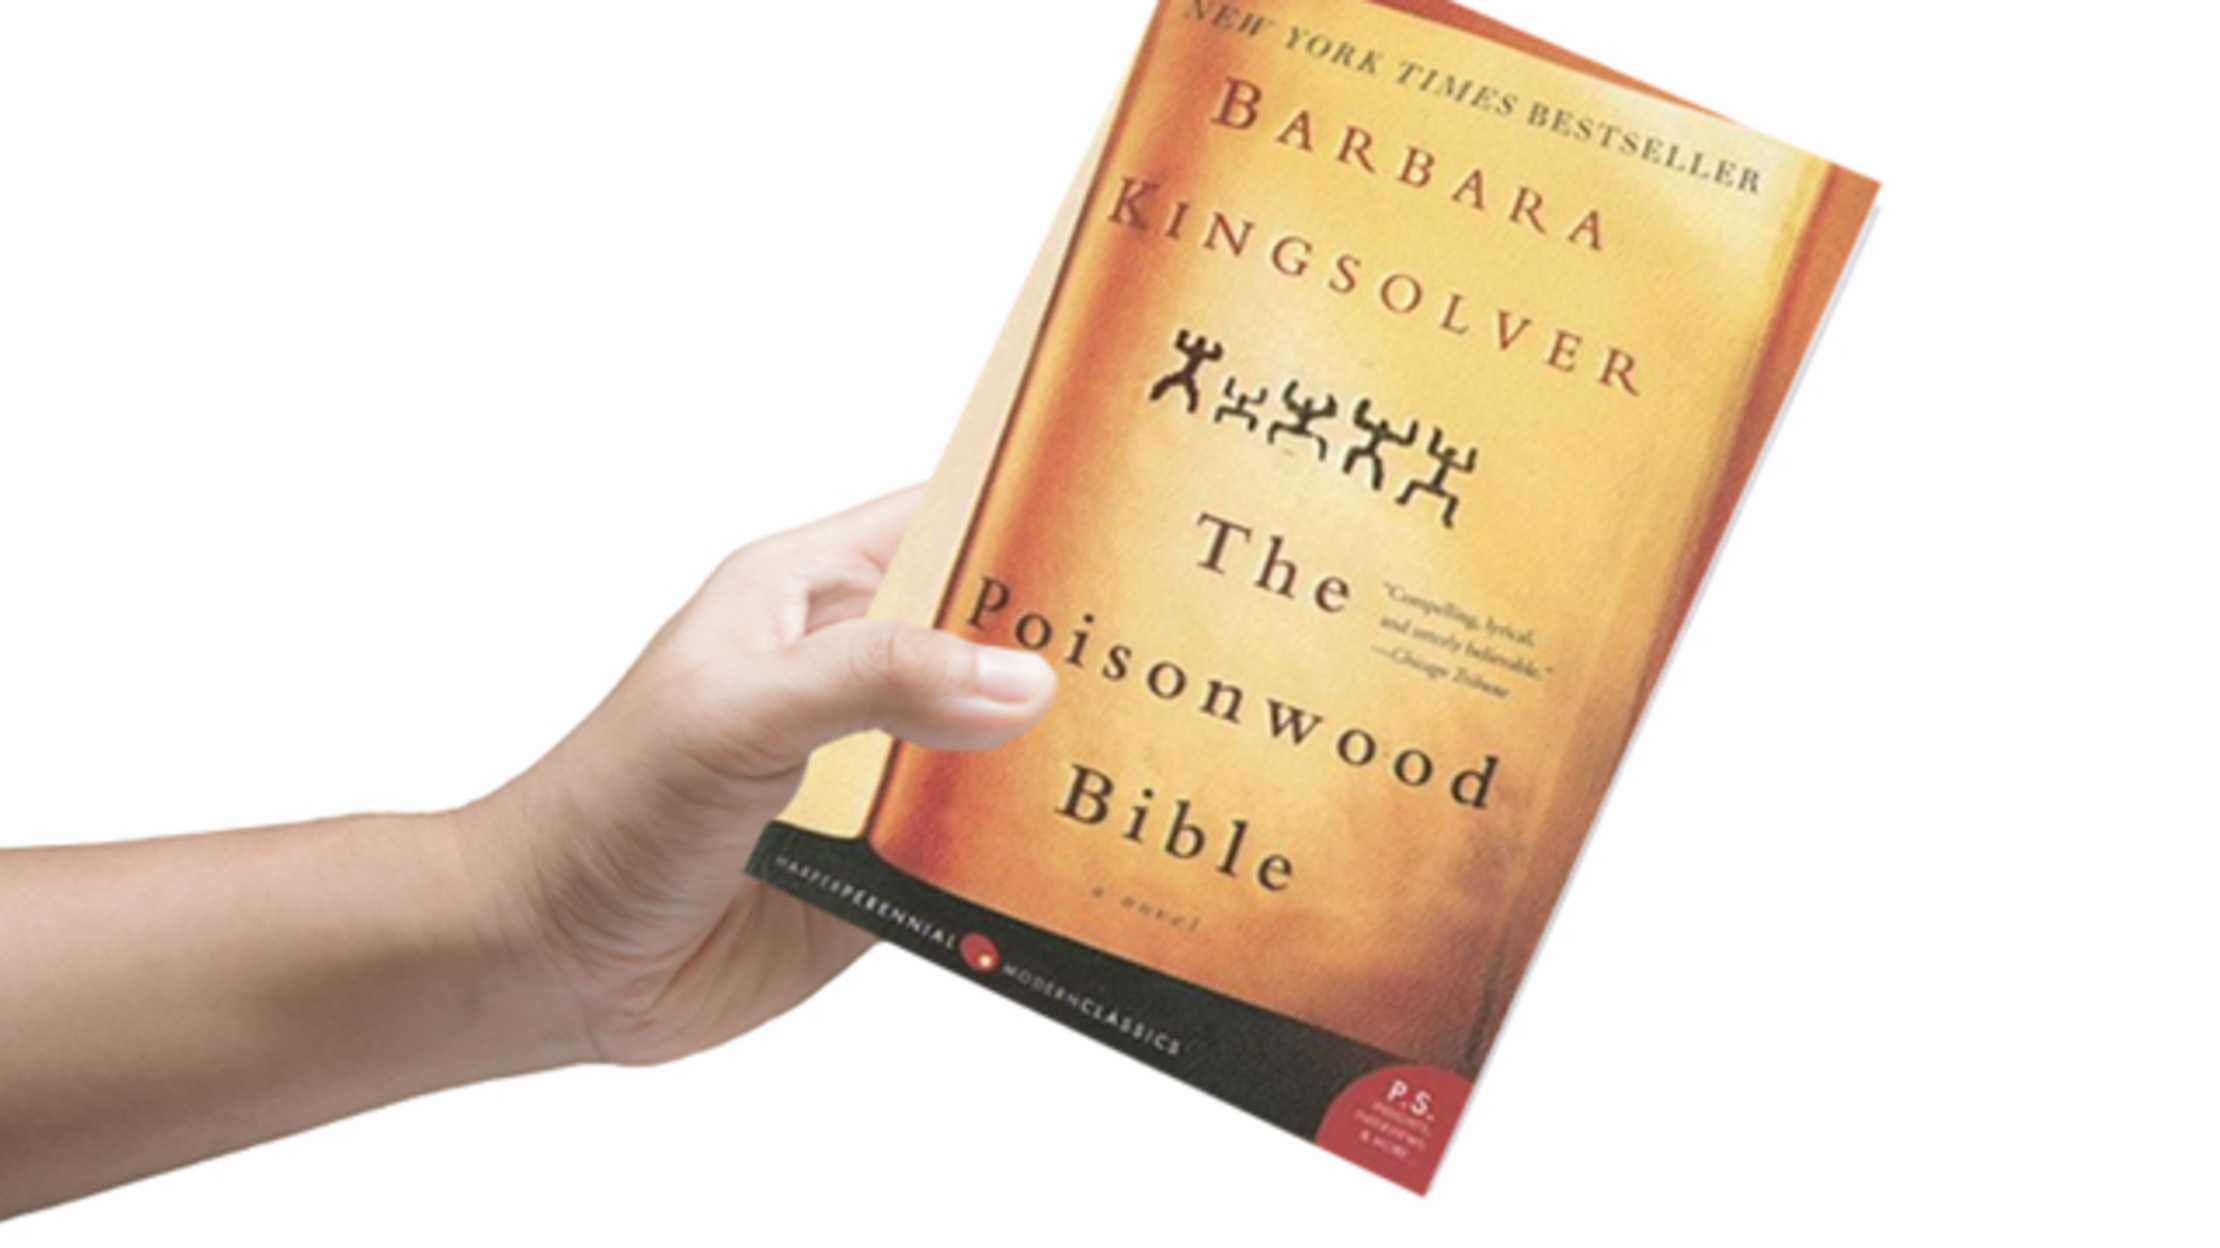 13 Things You May Not Know About ‘The Poisonwood Bible’ | Mental Floss